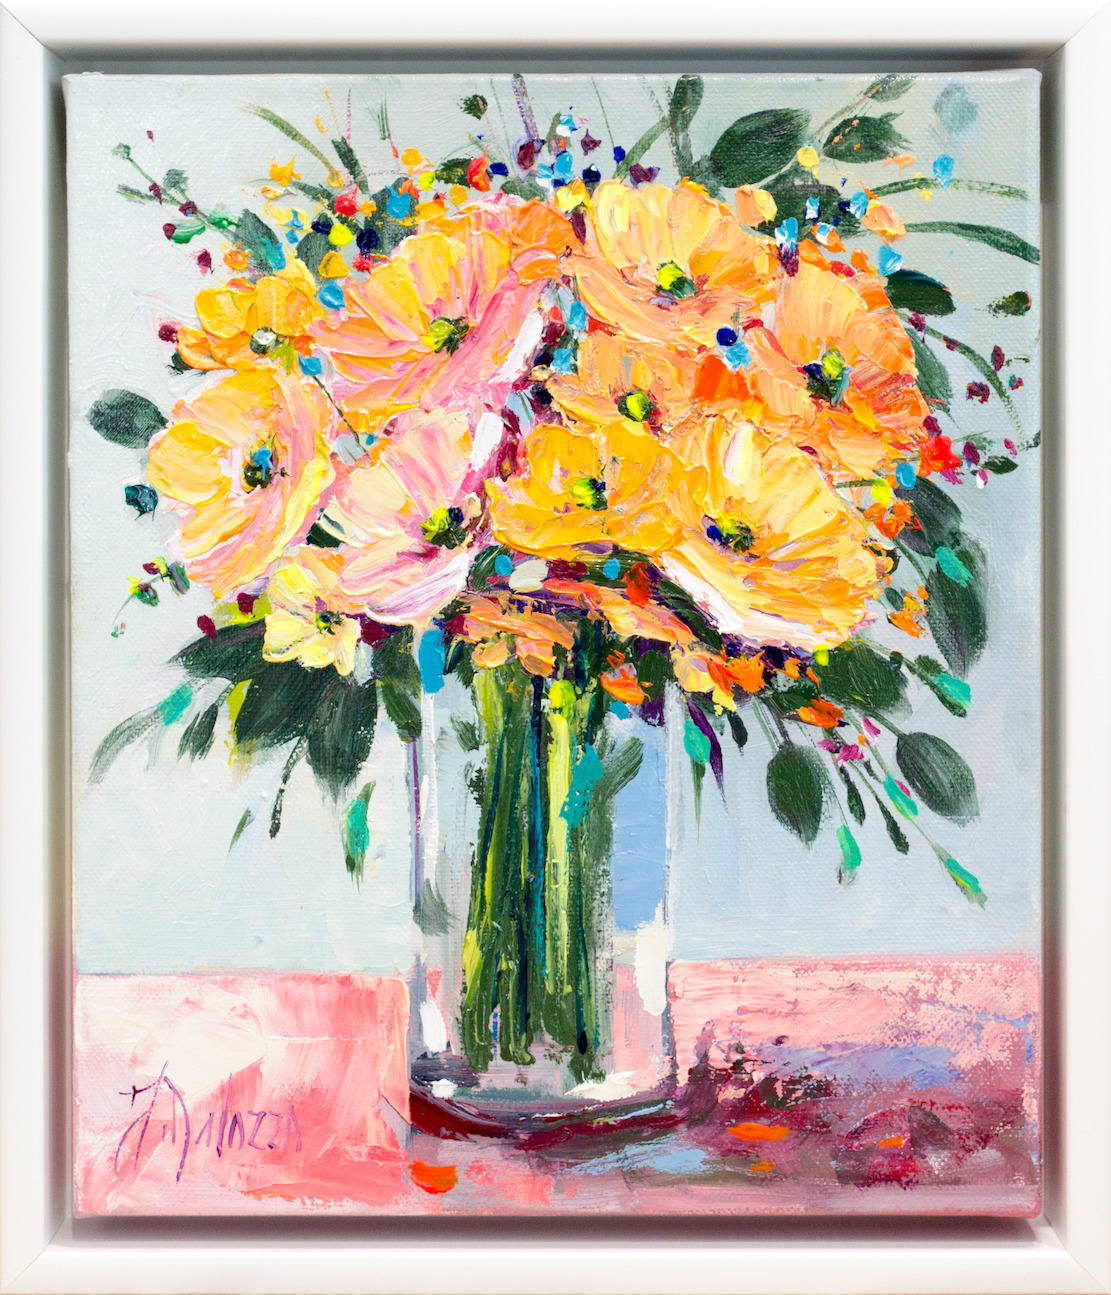 Framed Front View Of Still Life Painting "Daydreaming Bouquet" By Judith Dalozzo